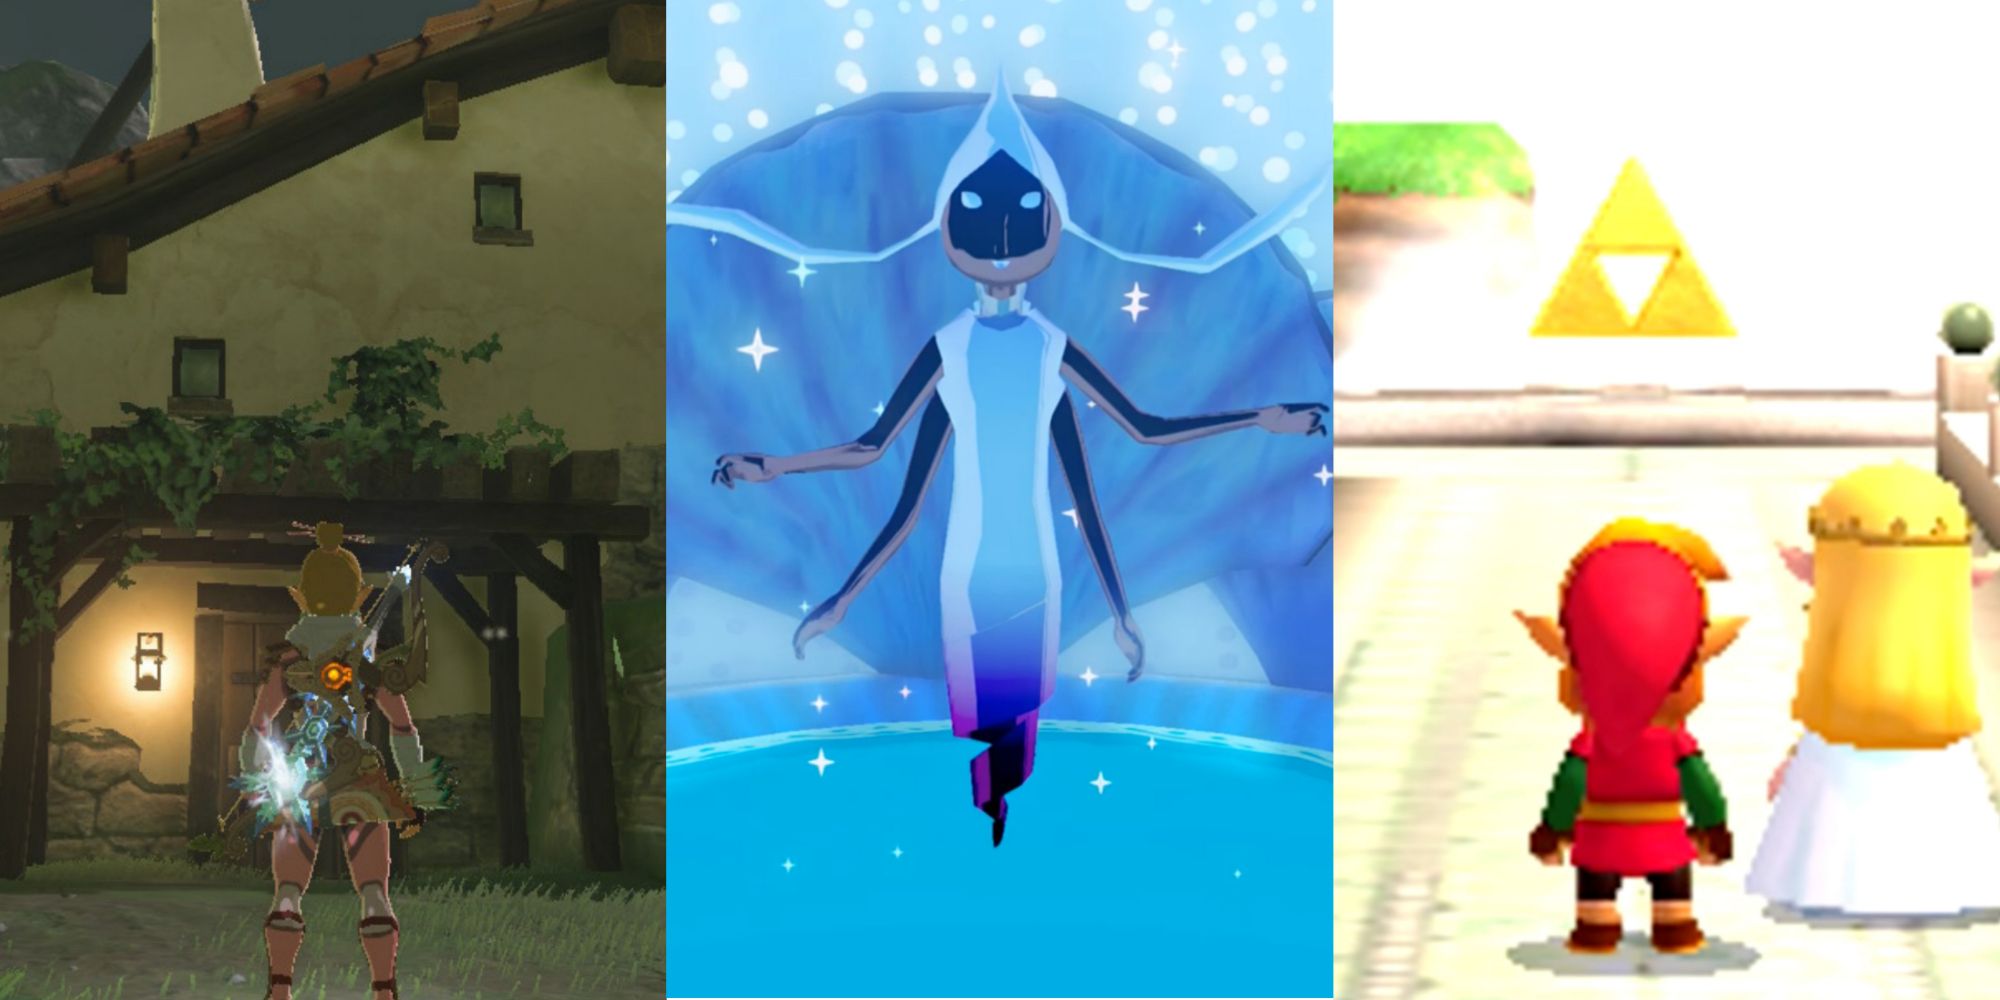 Split image of The Legend of Zelda Series Featuring Link's Home from The Breath of the Wild, the Great Fairy from Wind Waker, and Link, Zelda, and the Triforce from A Link Between Worlds